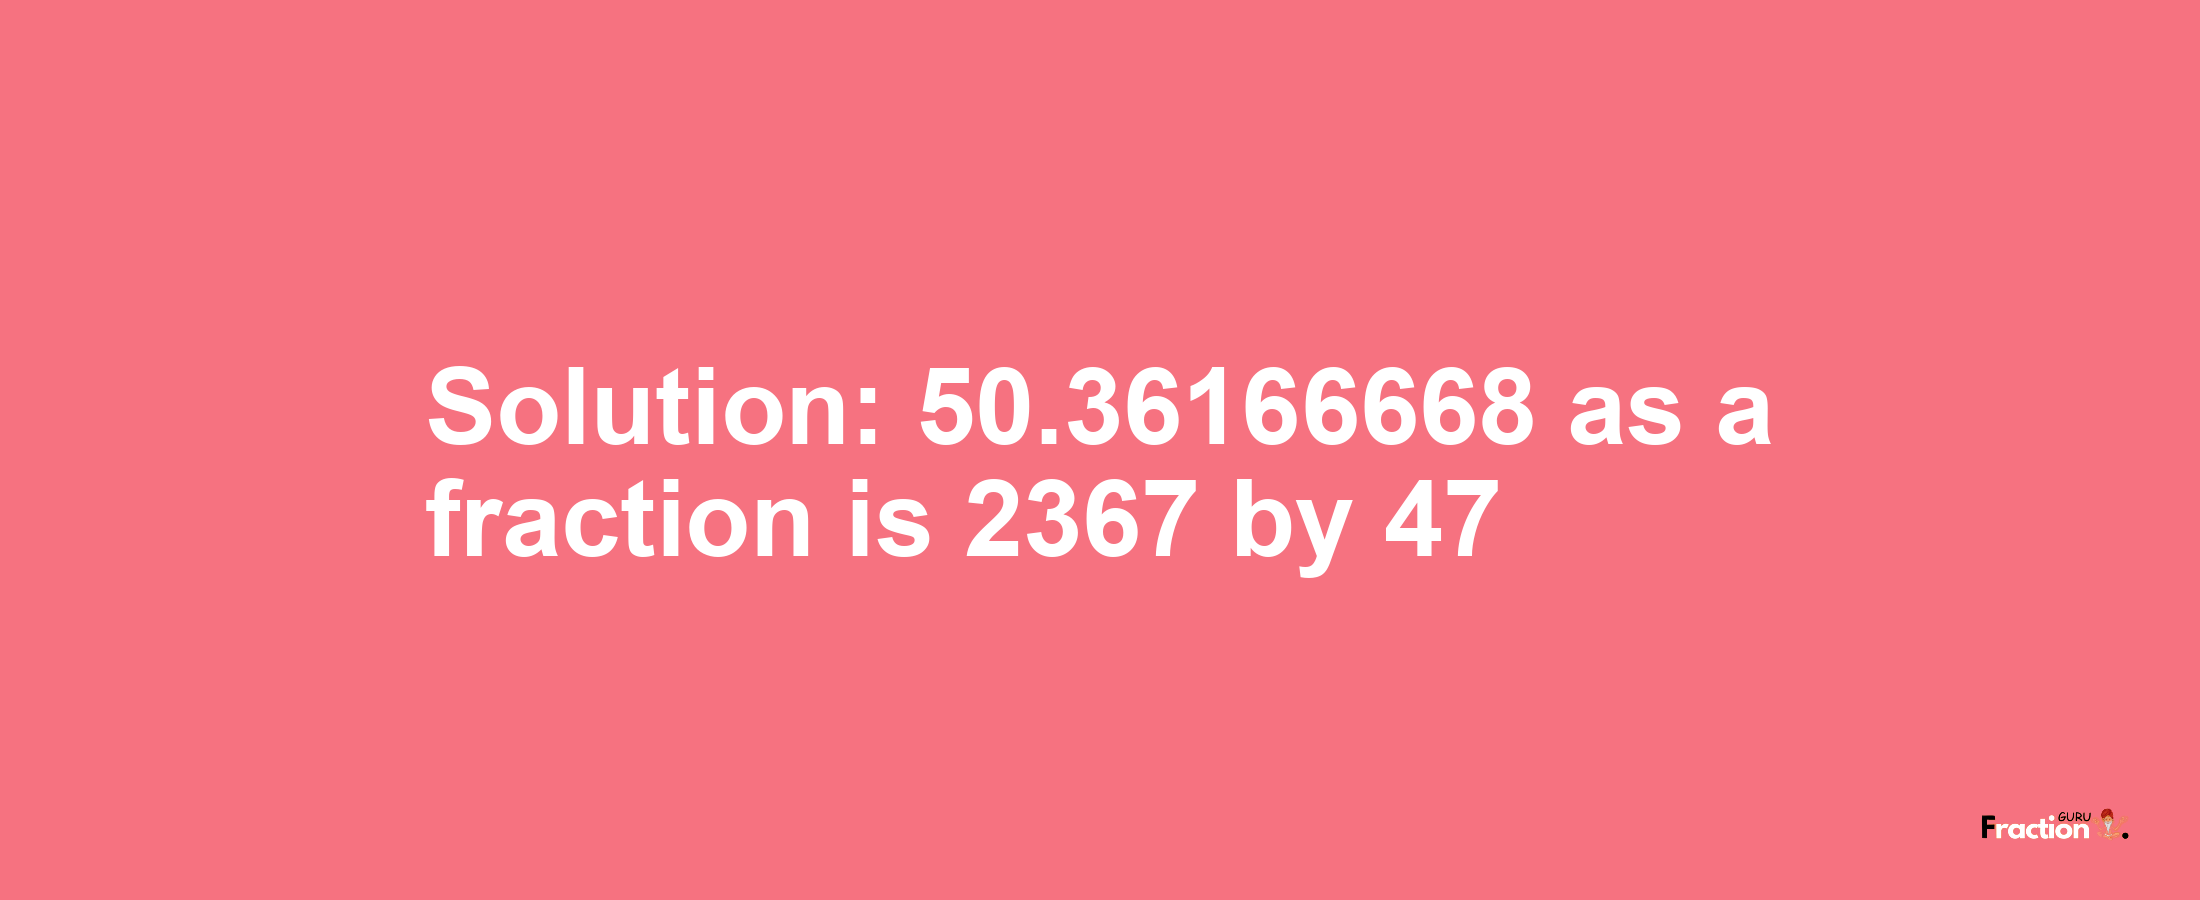 Solution:50.36166668 as a fraction is 2367/47